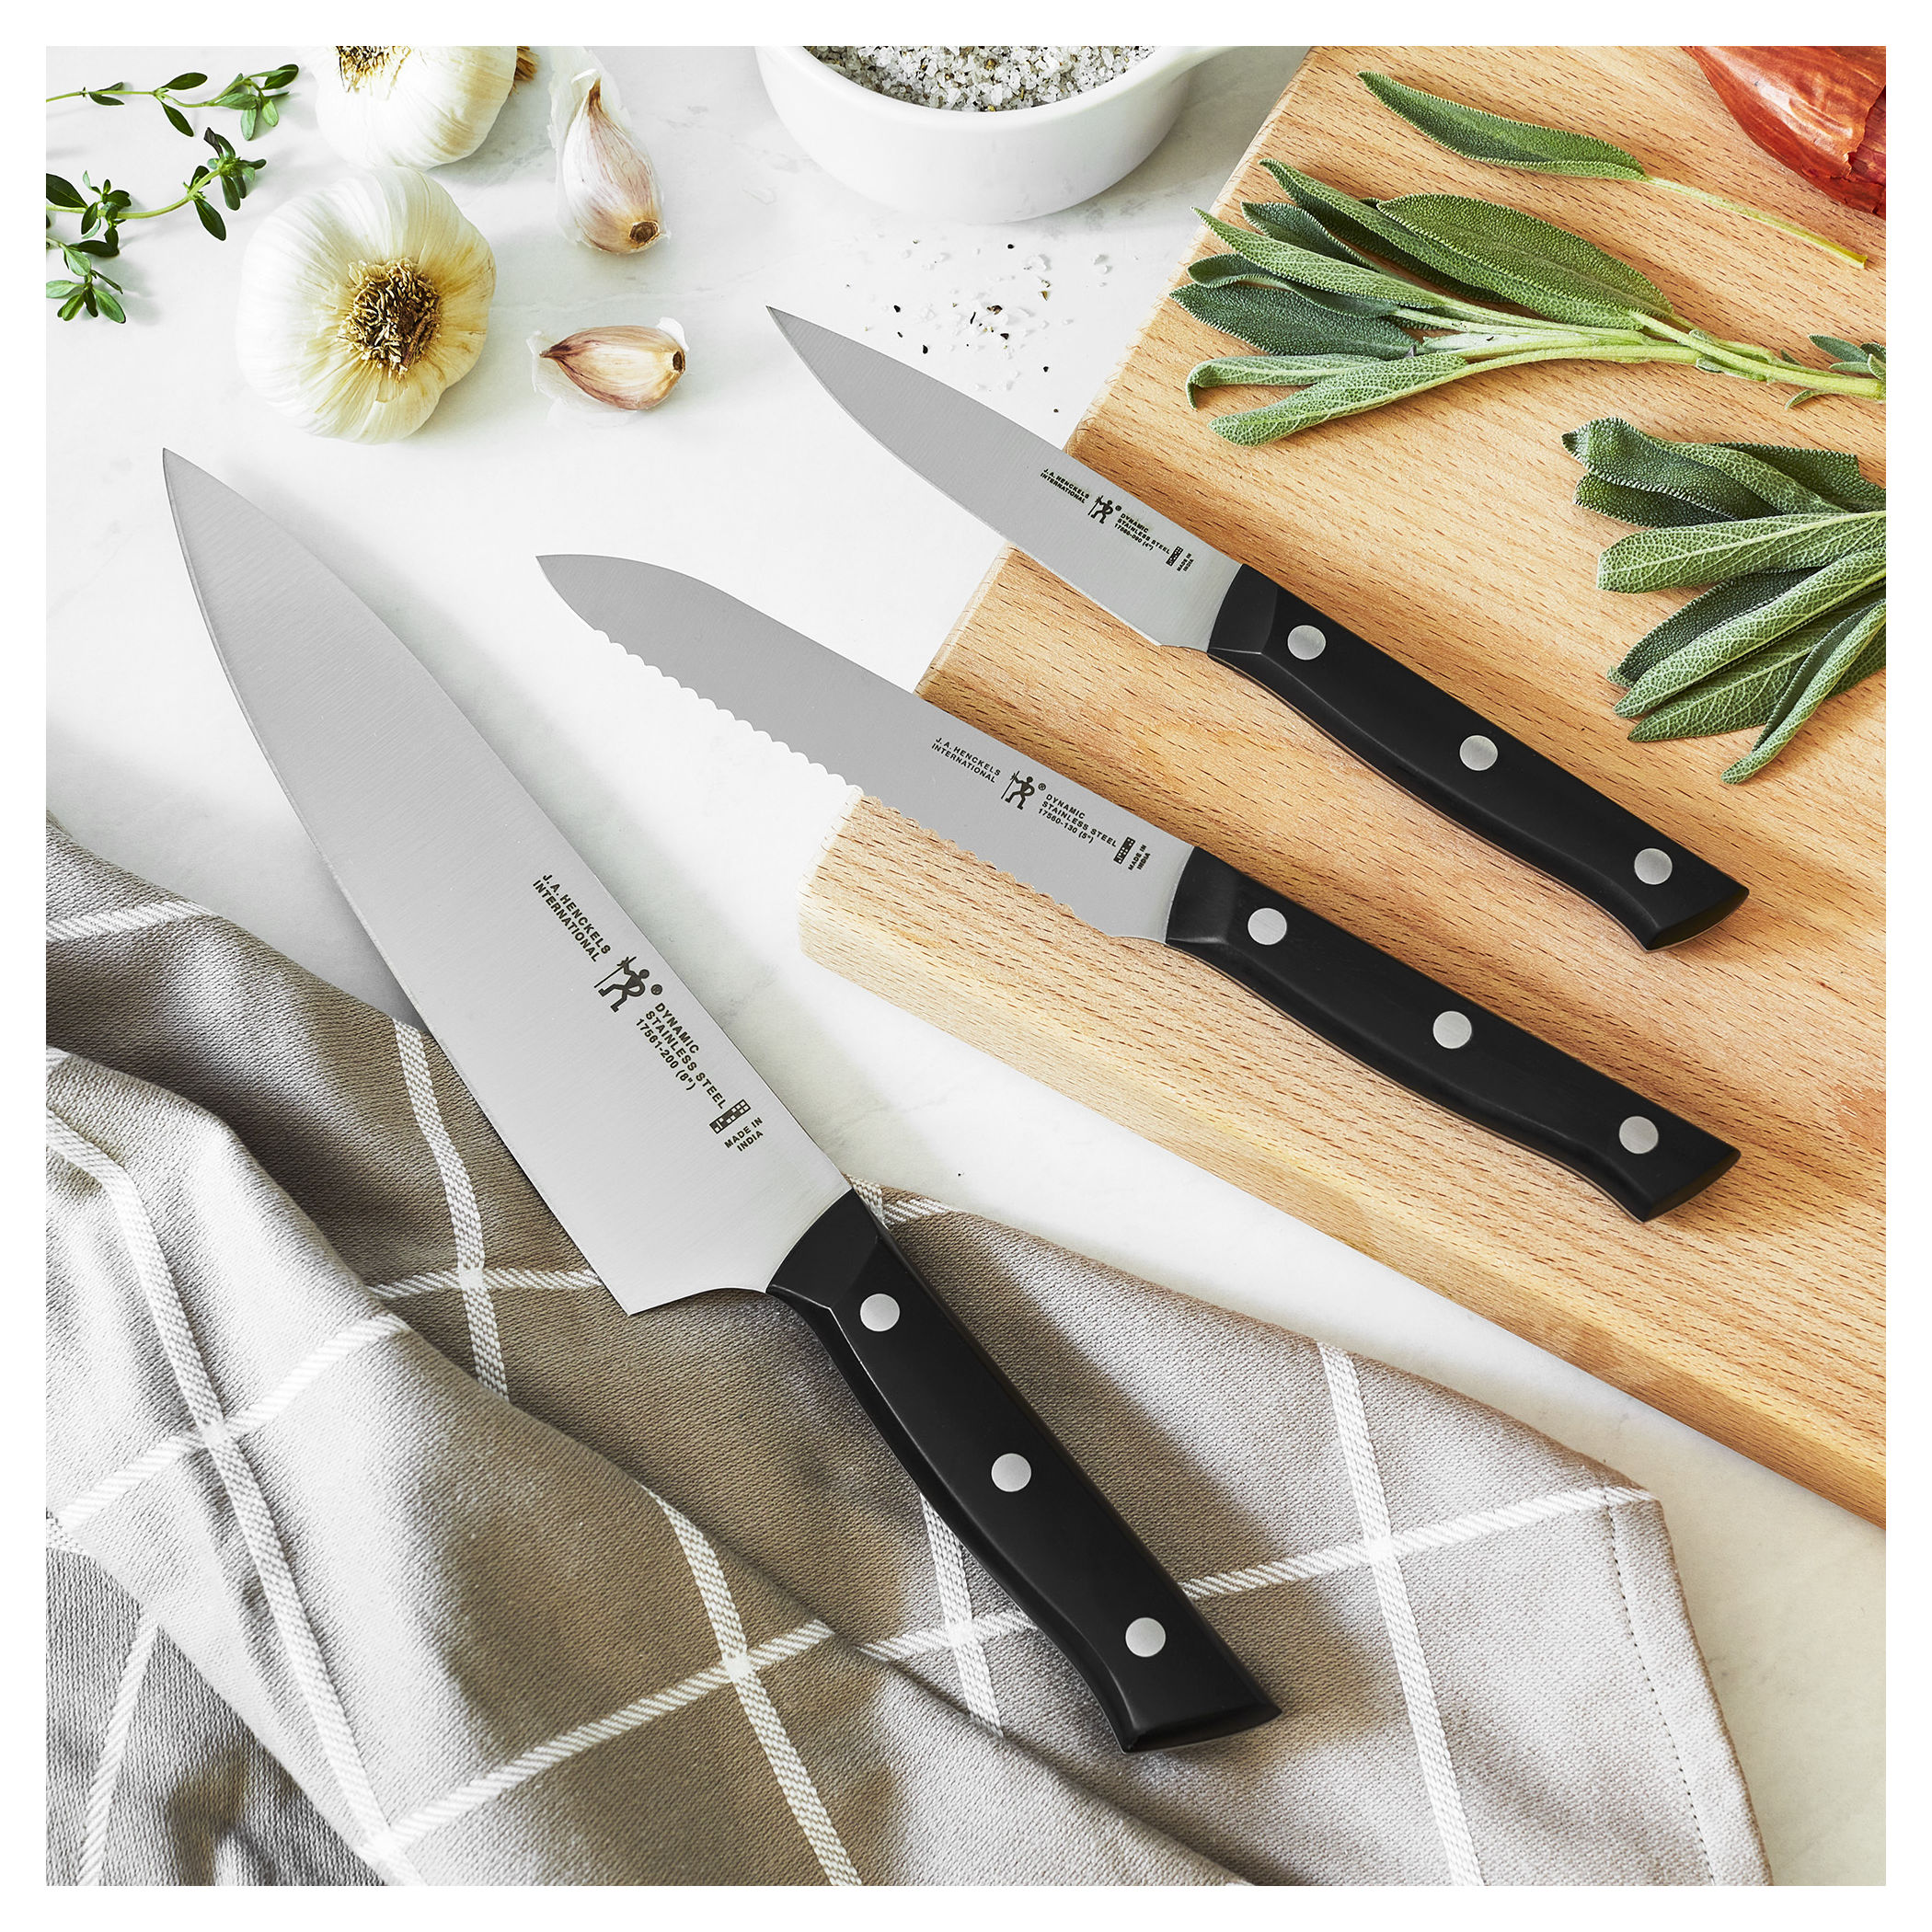 https://www.zwilling.com/on/demandware.static/-/Sites-zwilling-master-catalog/default/dw0905ce8a/images/large/750031201.jpg